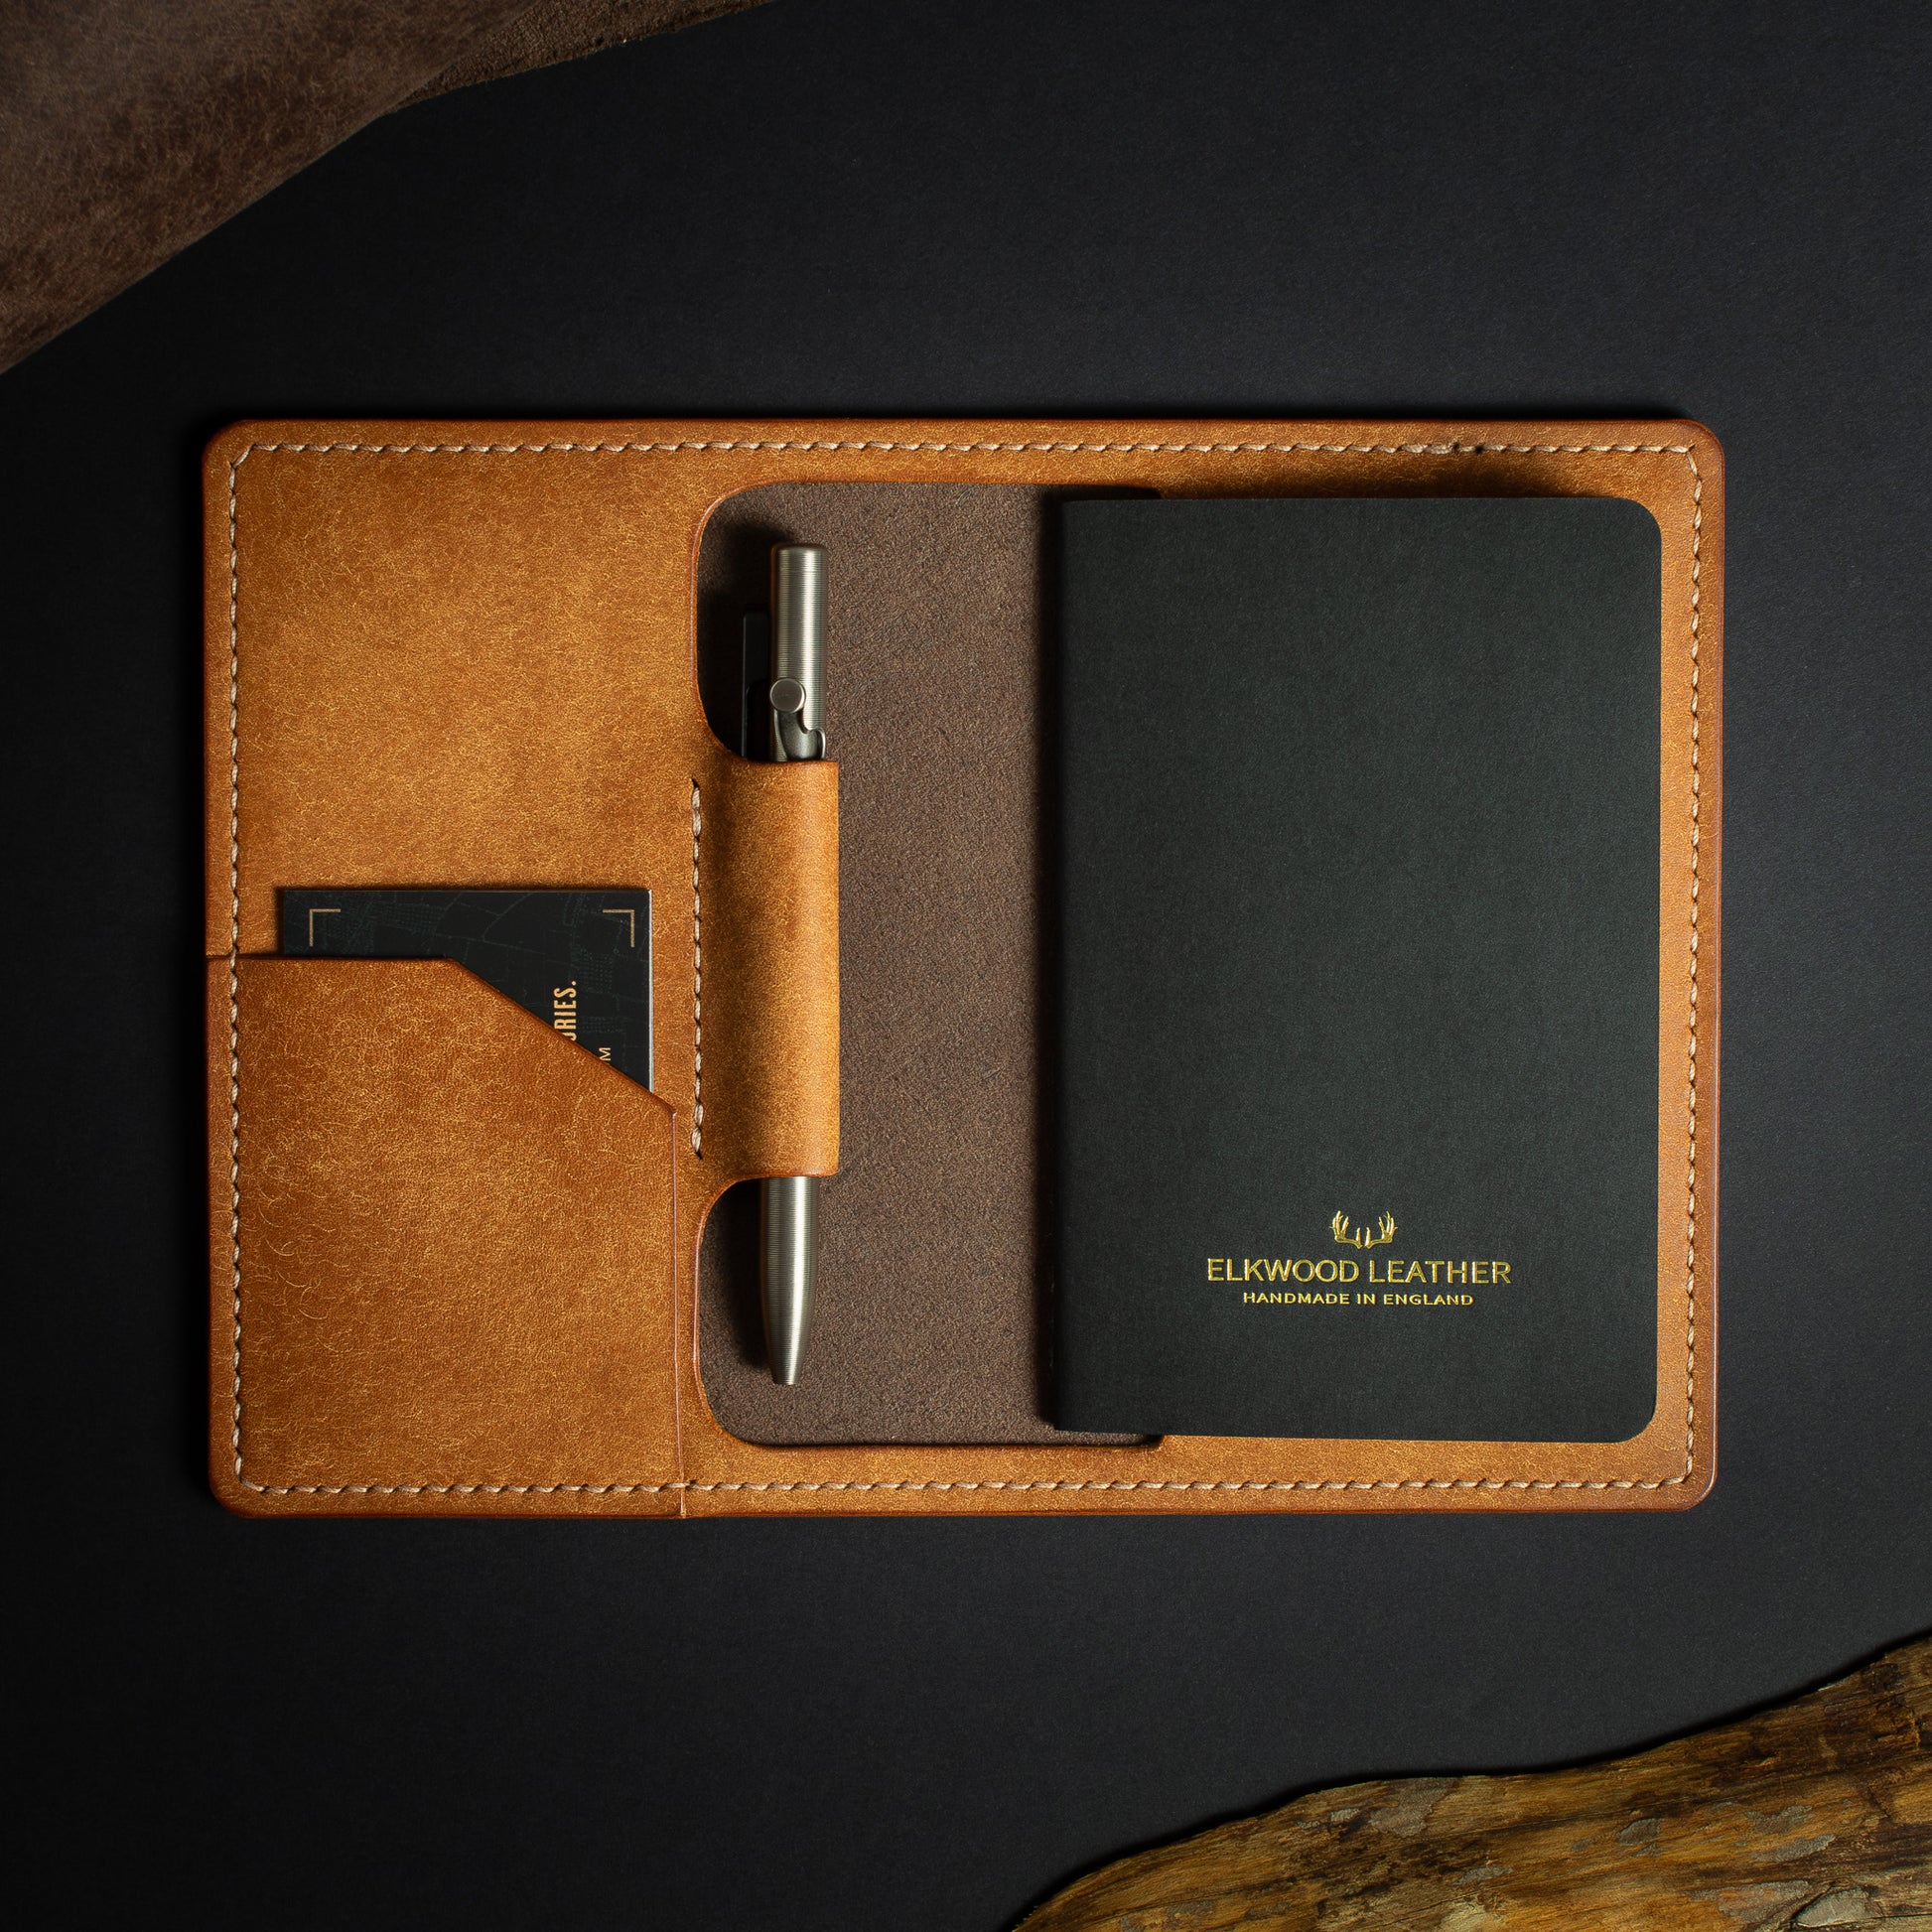 Handmade Leather Notebook Holder with pen holder and card slot. Leather Journal - Castagno & Cognac Peublo Leather